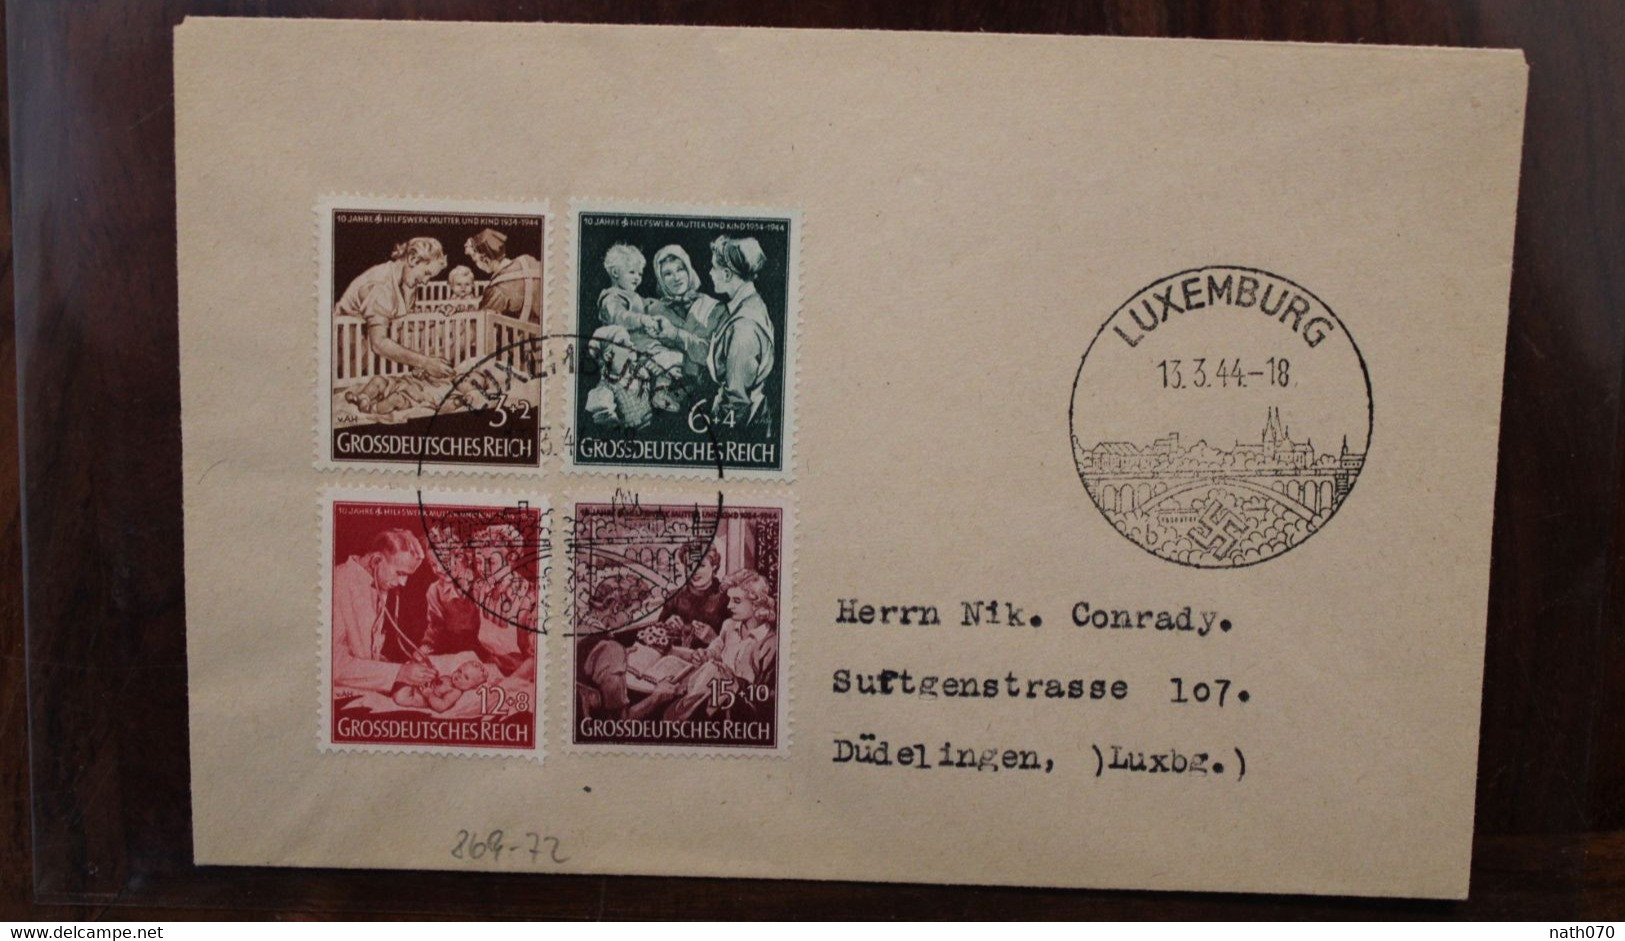 LUXEMBURG 1944 Dudelingen Cover Luxembourg Besetzung Occupation - 1940-1944 German Occupation